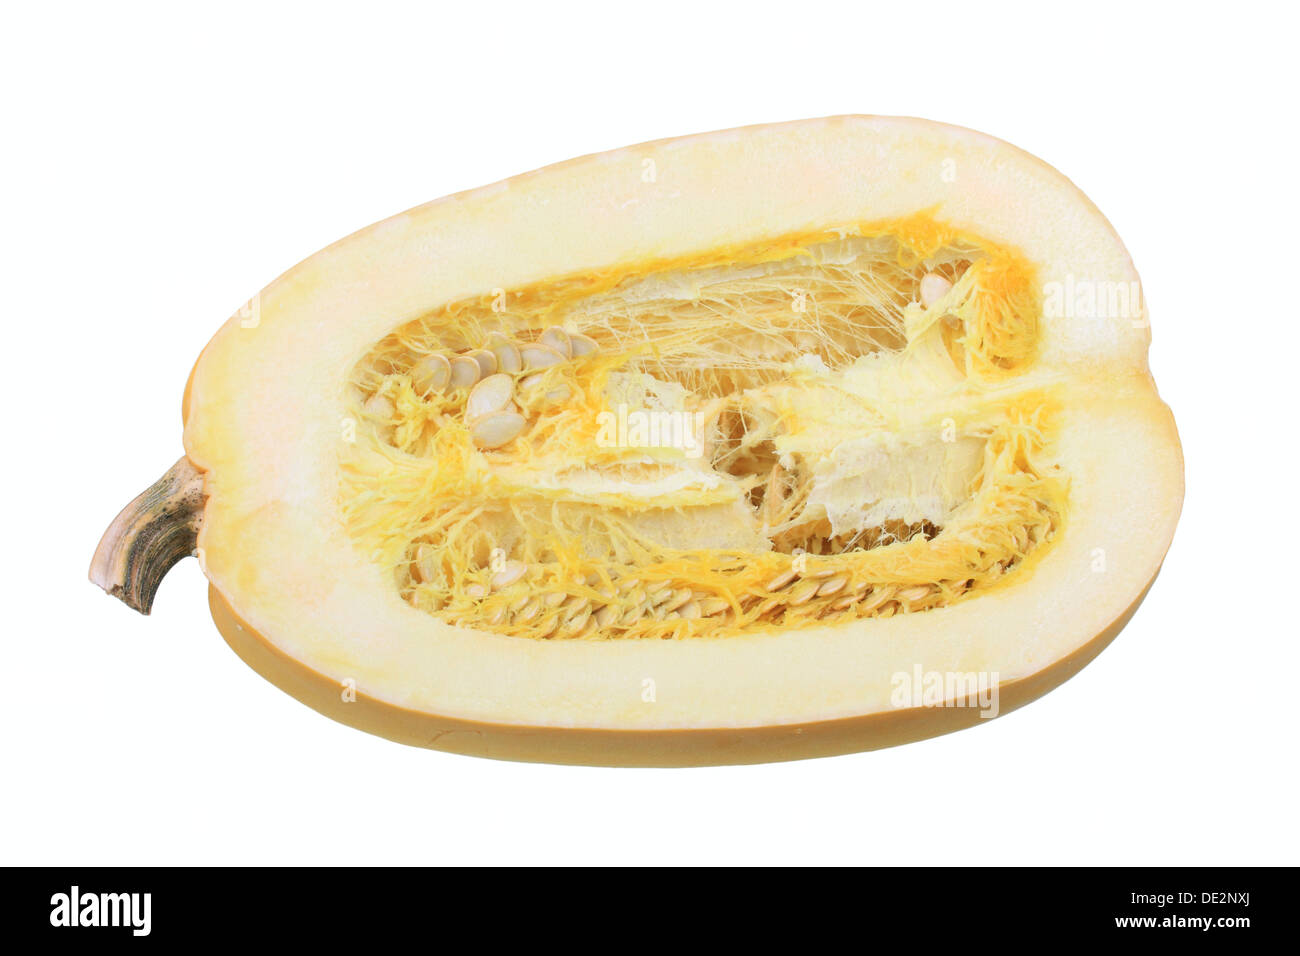 Spaghetti squash, cut with pulp and seeds Stock Photo